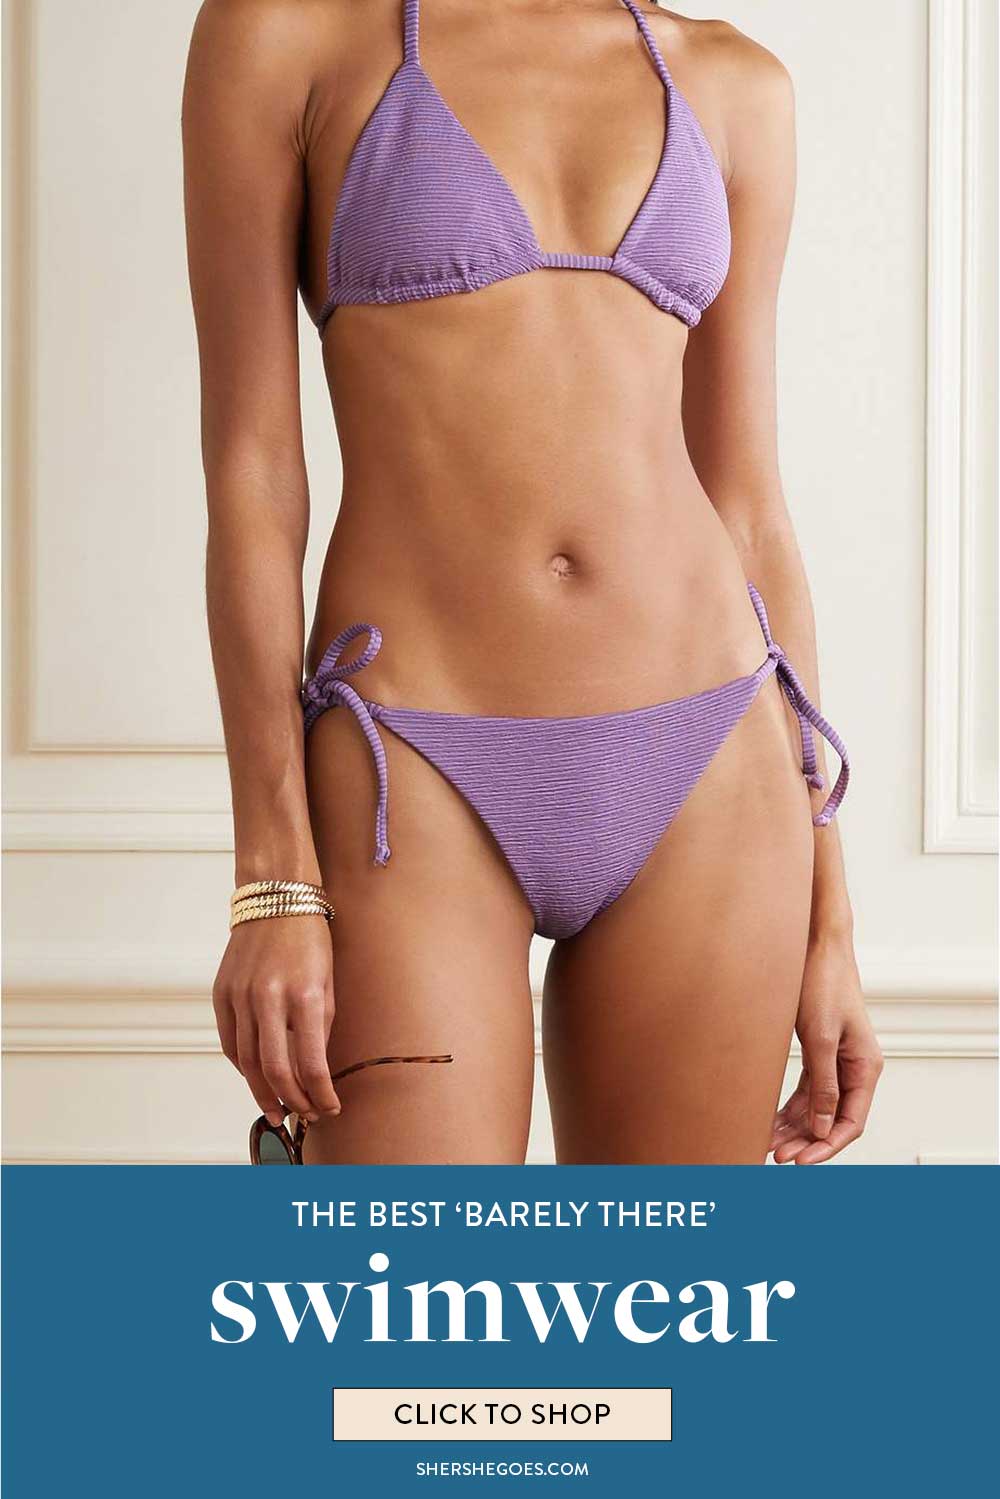 Barely there swimsuits